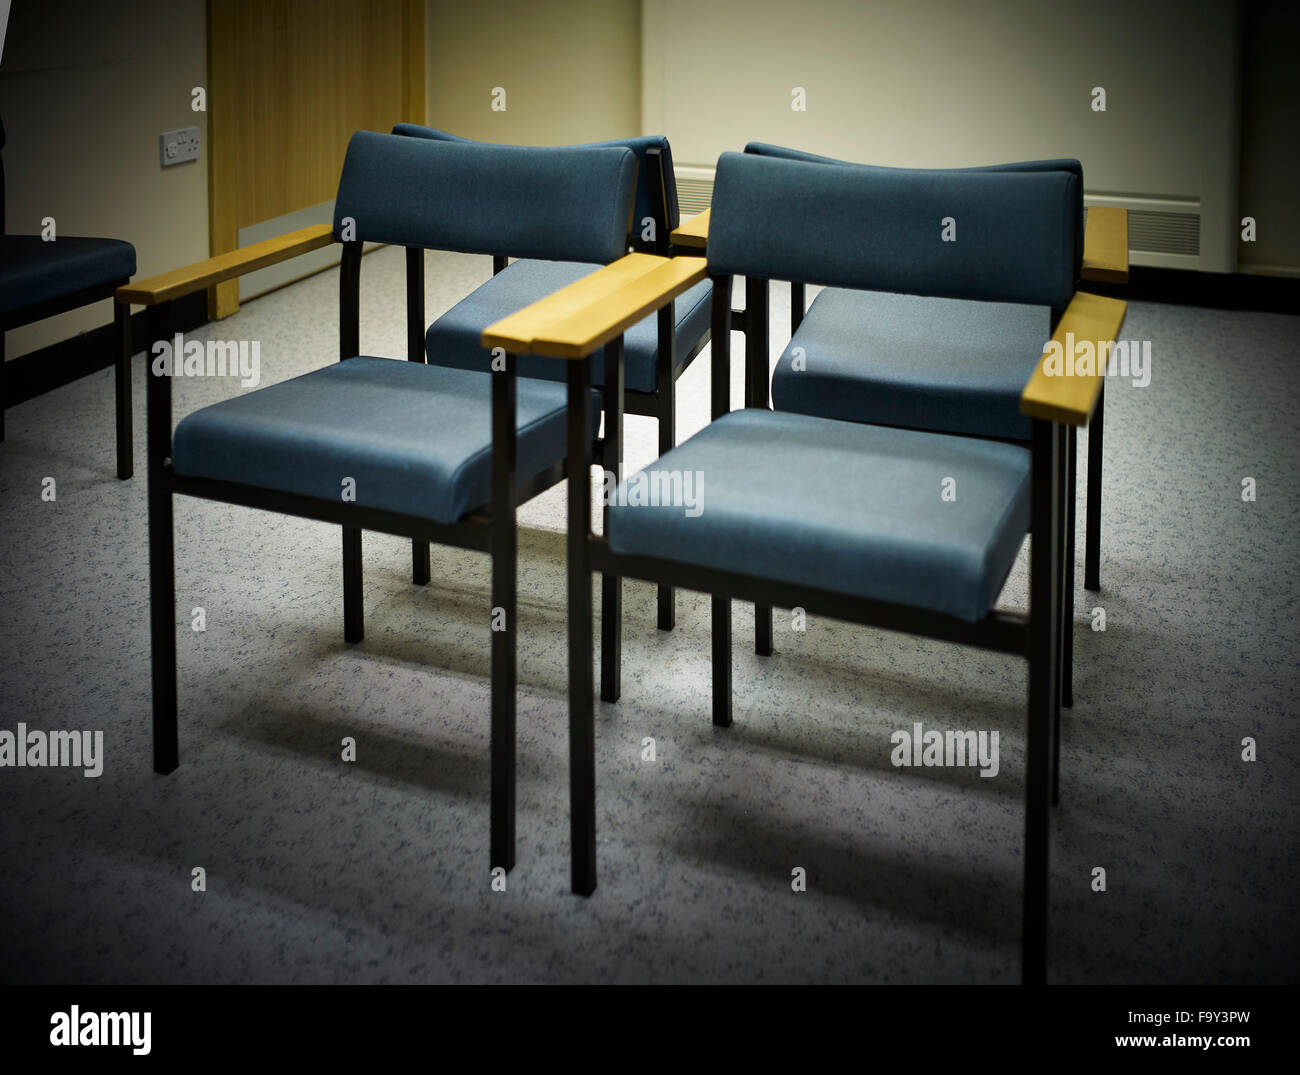 Chairs in Doctors waiting room Stock Photo